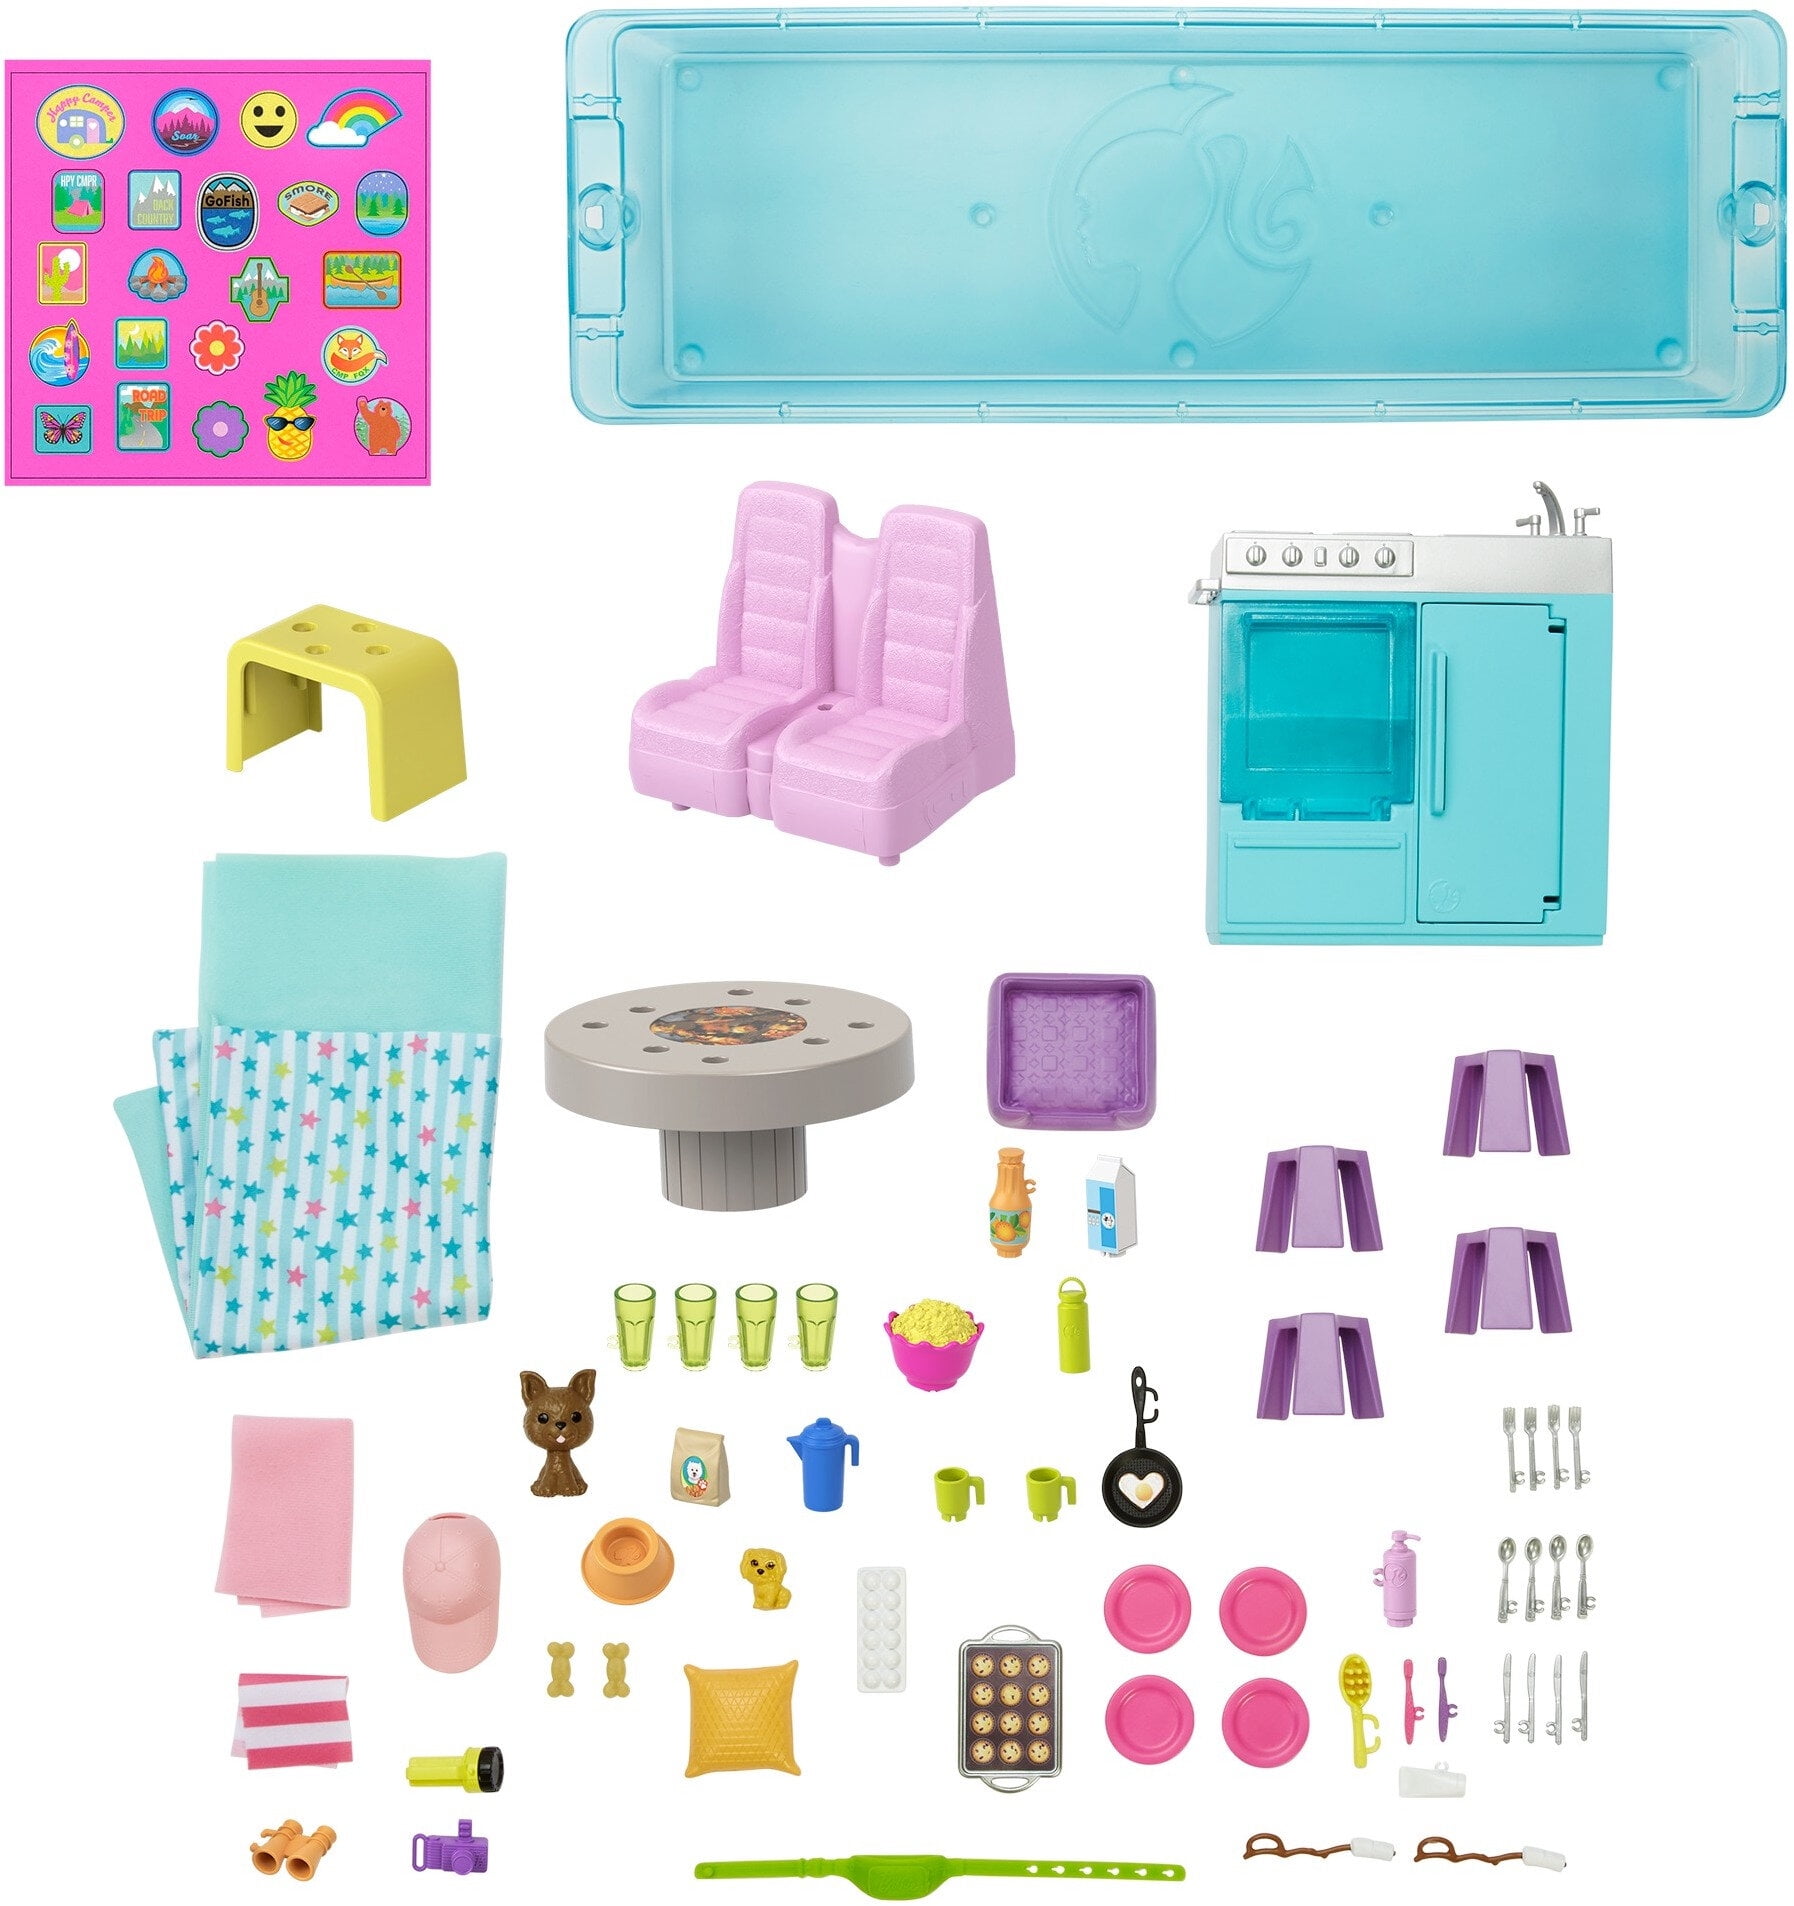  Barbie Camper, Doll Playset with 60 Accessories, 30-Inch-Slide  and 7 Play Areas, Dream Camper : Toys & Games